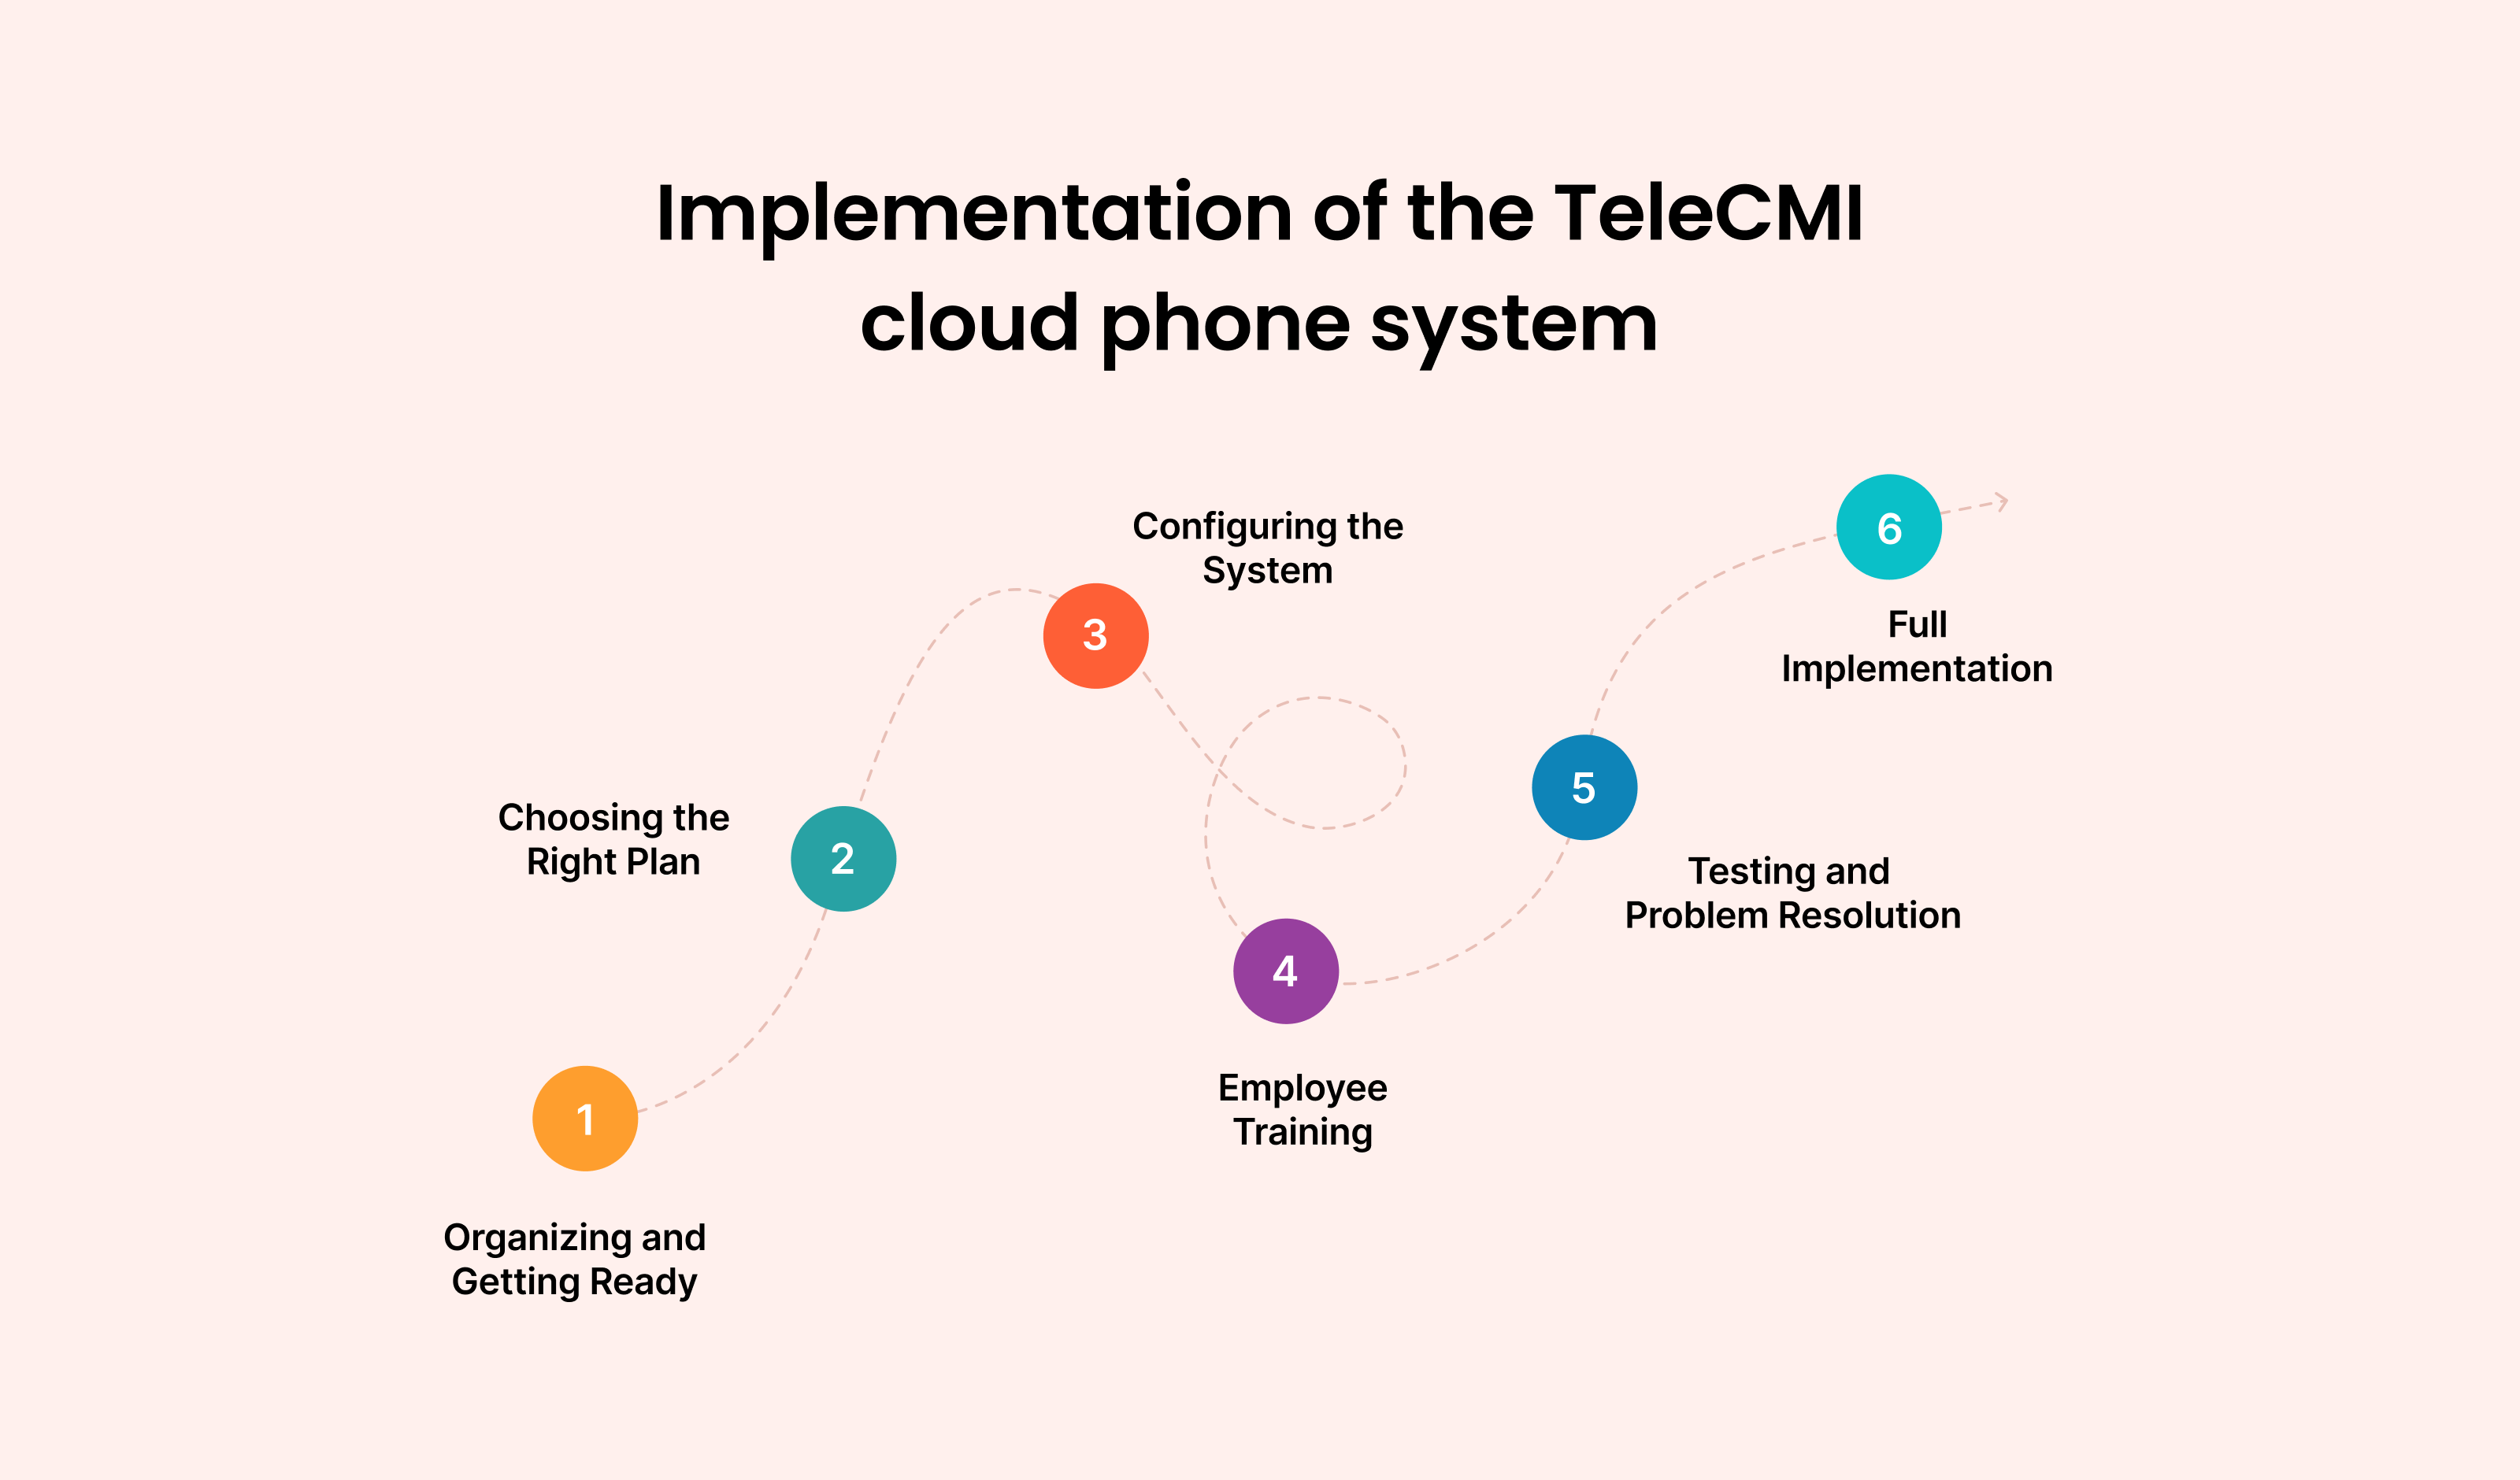 Implementation of the TeleCMI Cloud Phone System: